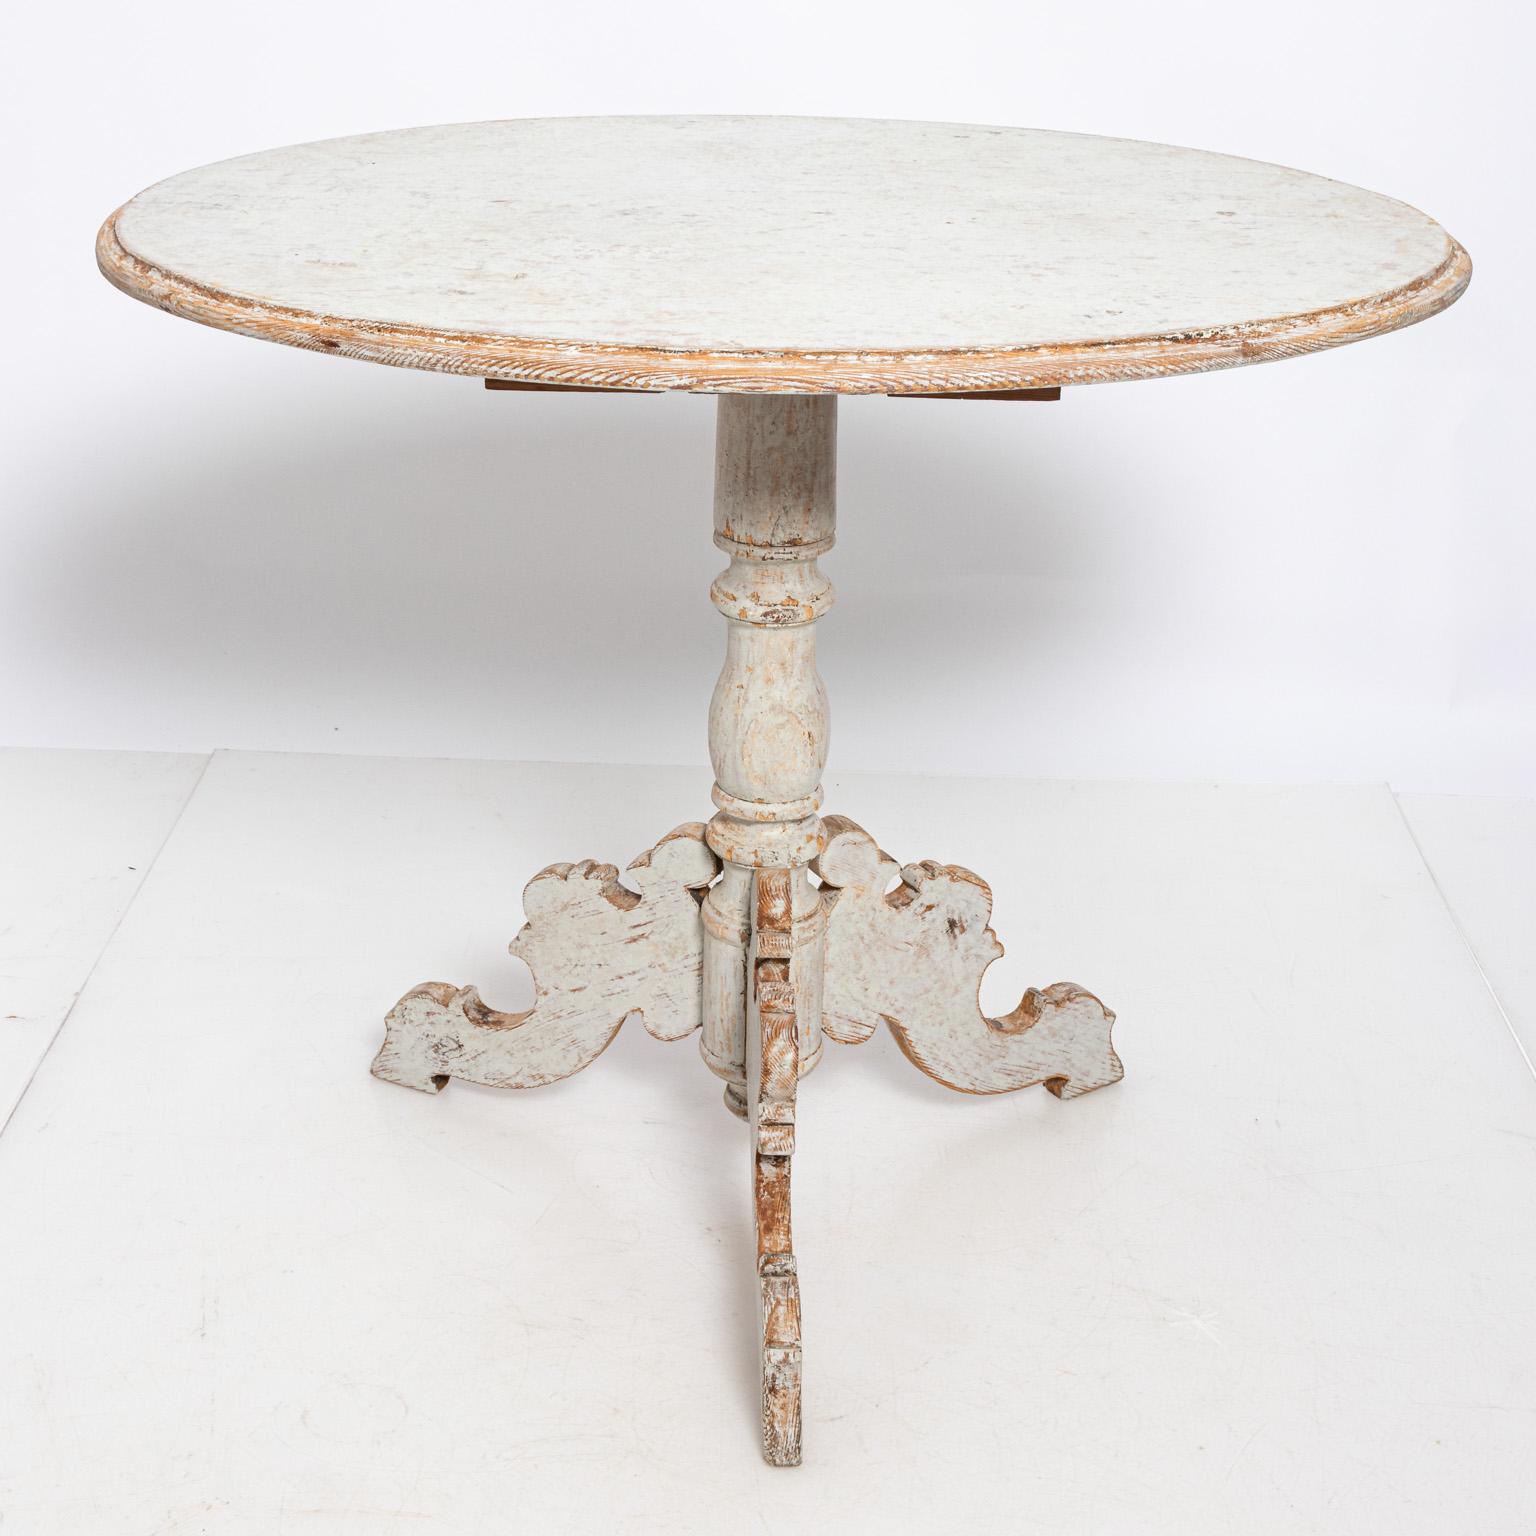 Swedish white painted oval side table with pedestal base and scrolled legs, circa 19th century. The piece features original patina and historic paint. Please note of wear consistent with age.